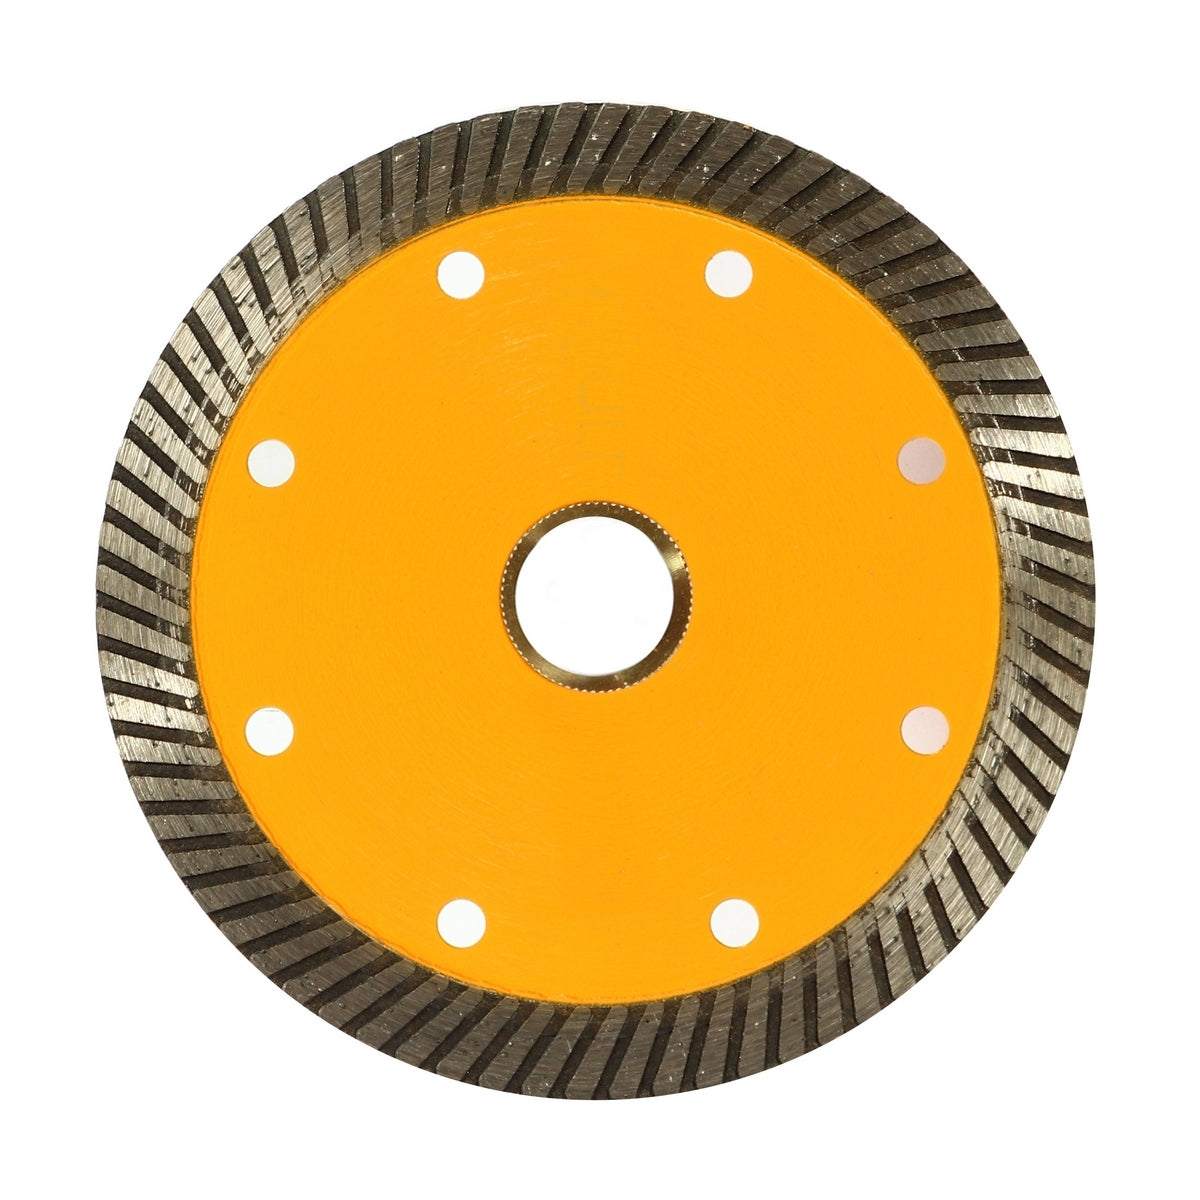 INGCO 180mm / 105mm Industrial Ultrathin Diamond Disc Wet Cutting Blade for Angle Grinder Power Tools Replacement Parts & Accessories | DMD031801HT DMD031051HT